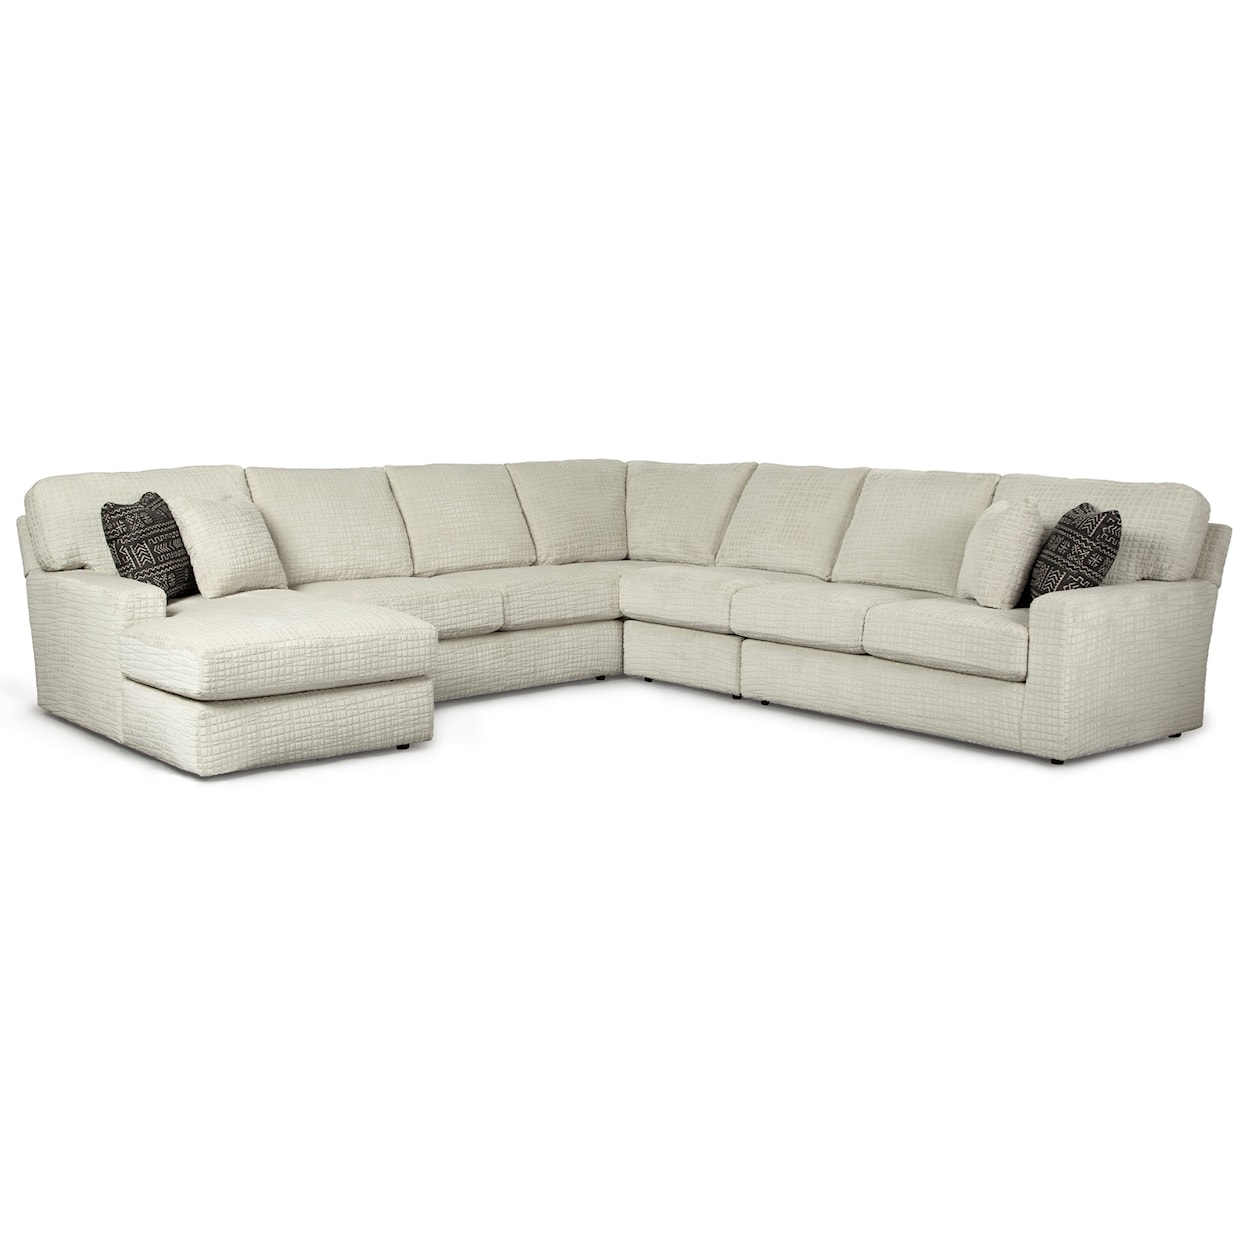 Best Home Furnishings Dovely 5 Pc Sectional Sofa w/ LAF Chaise